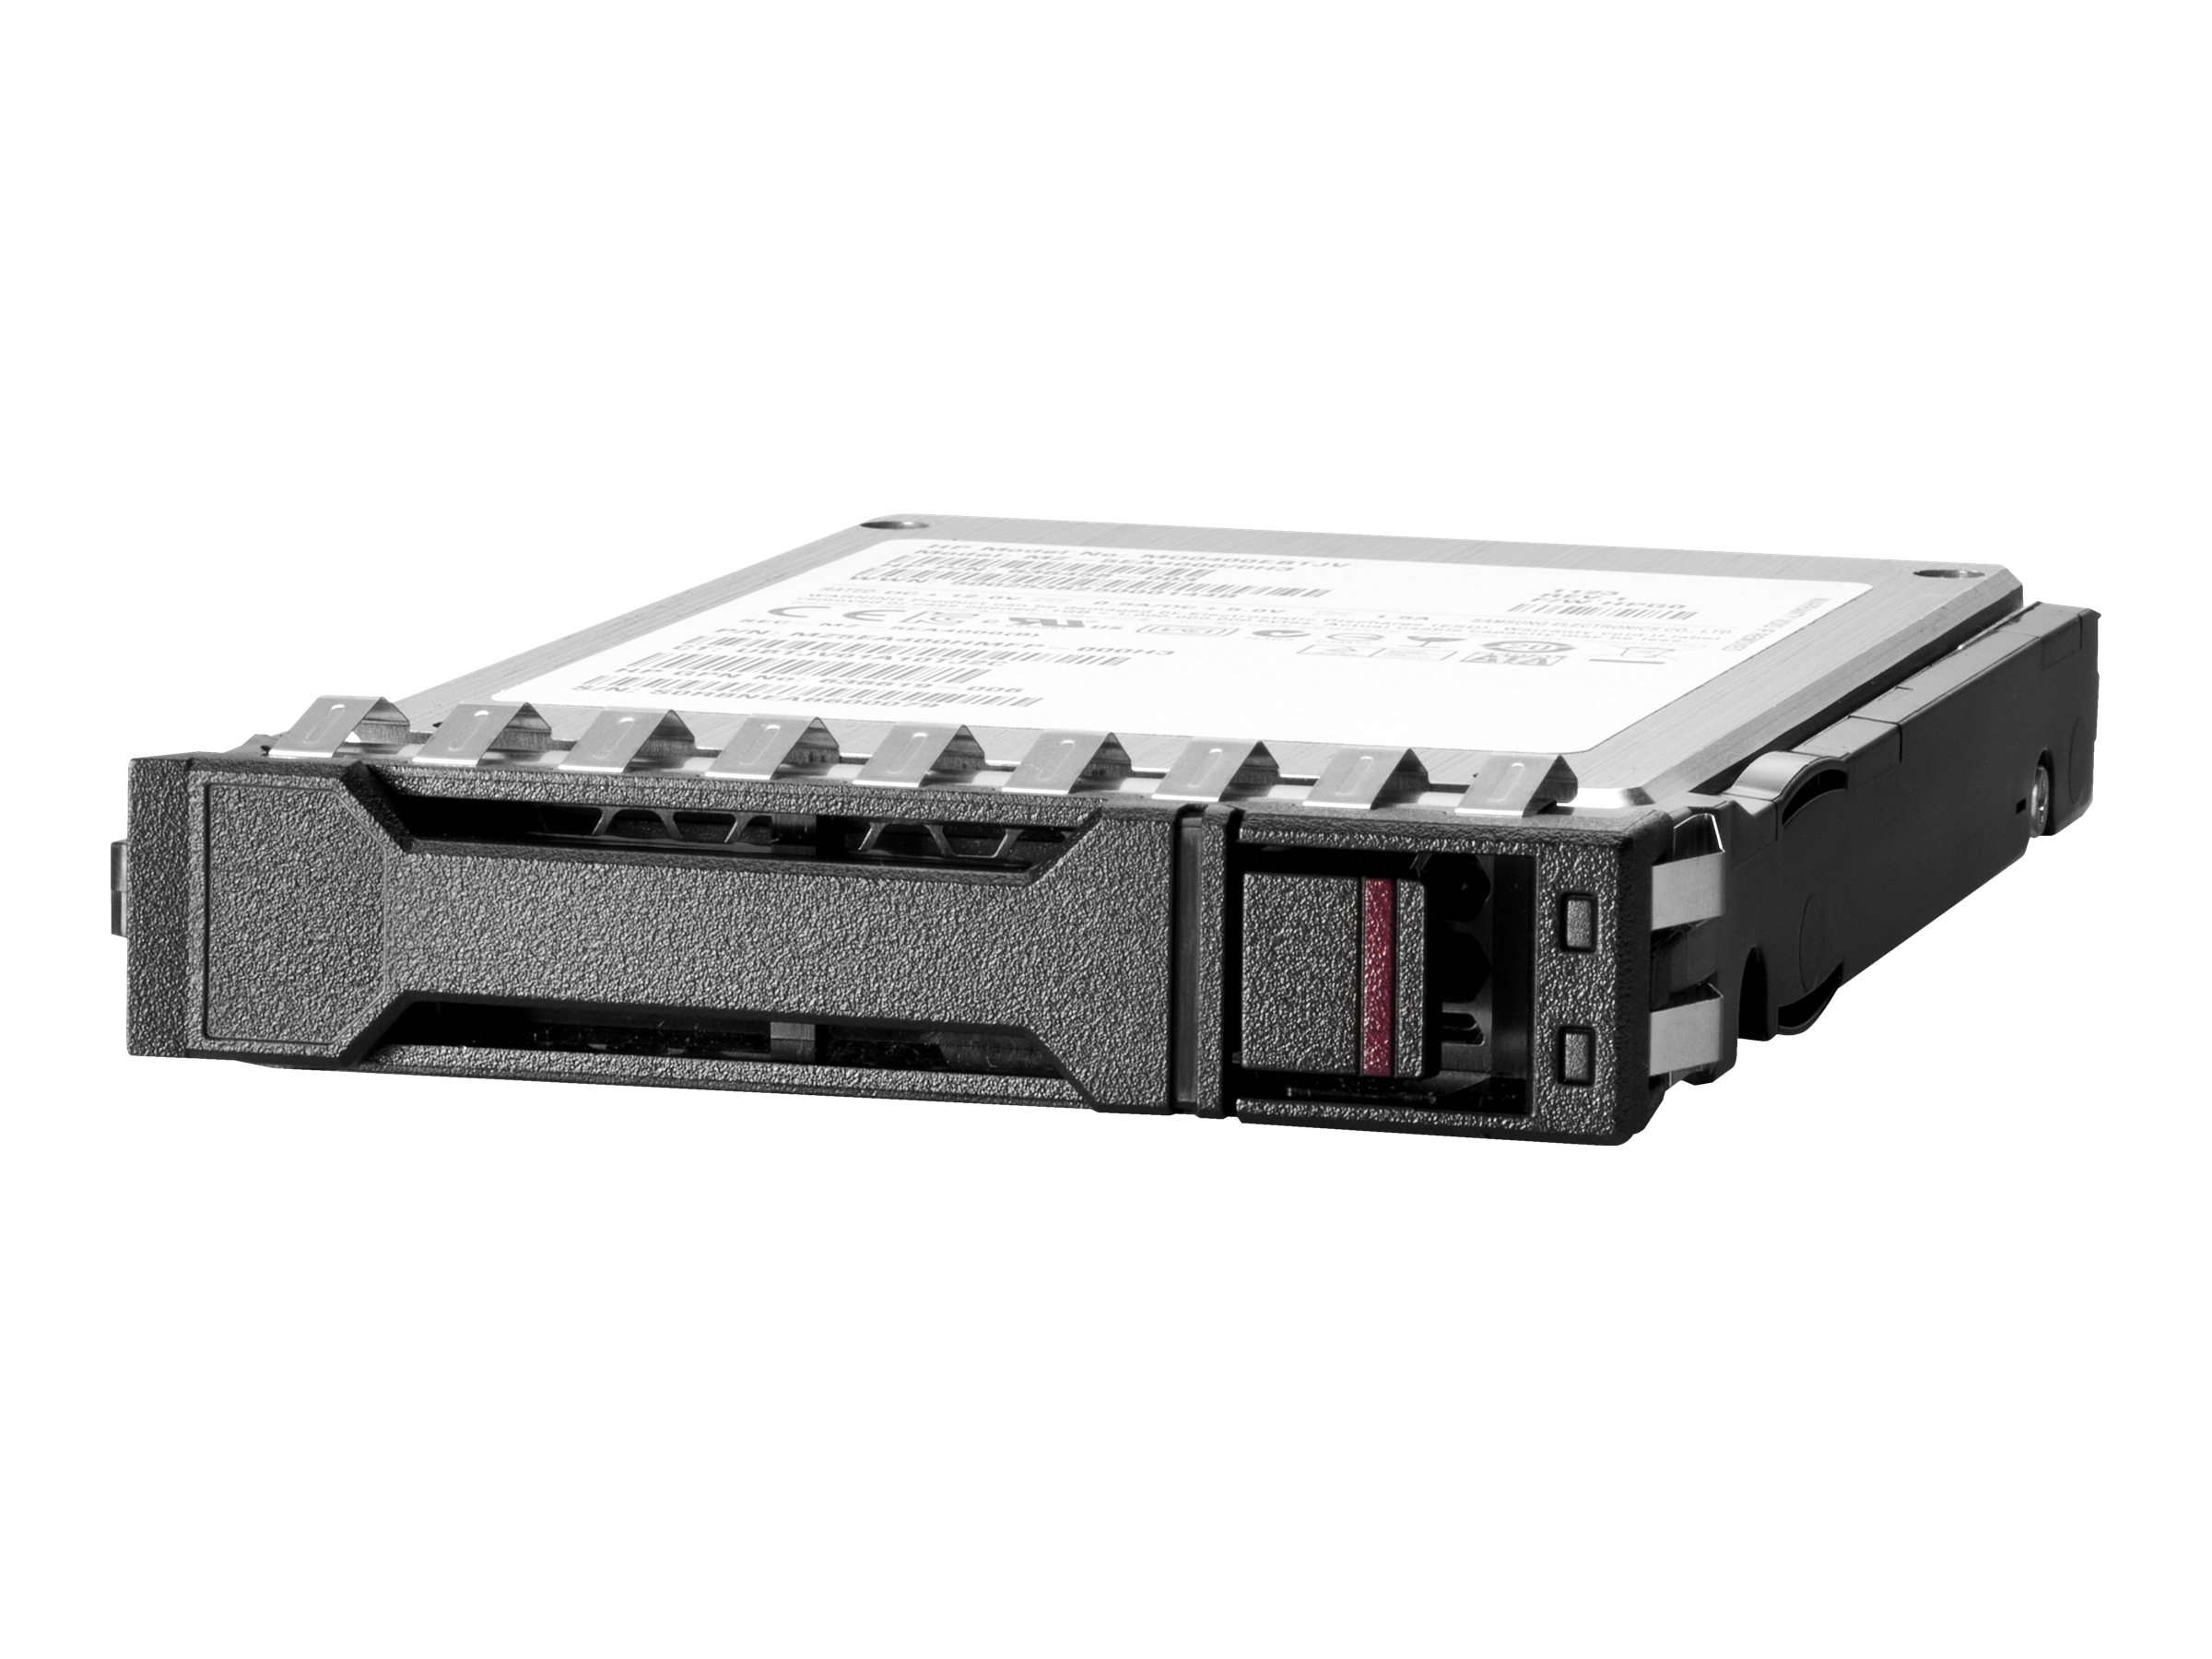 HPE PM897 - SSD - Mixed Use - 1.92 TB - Hot-Swap - 2.5